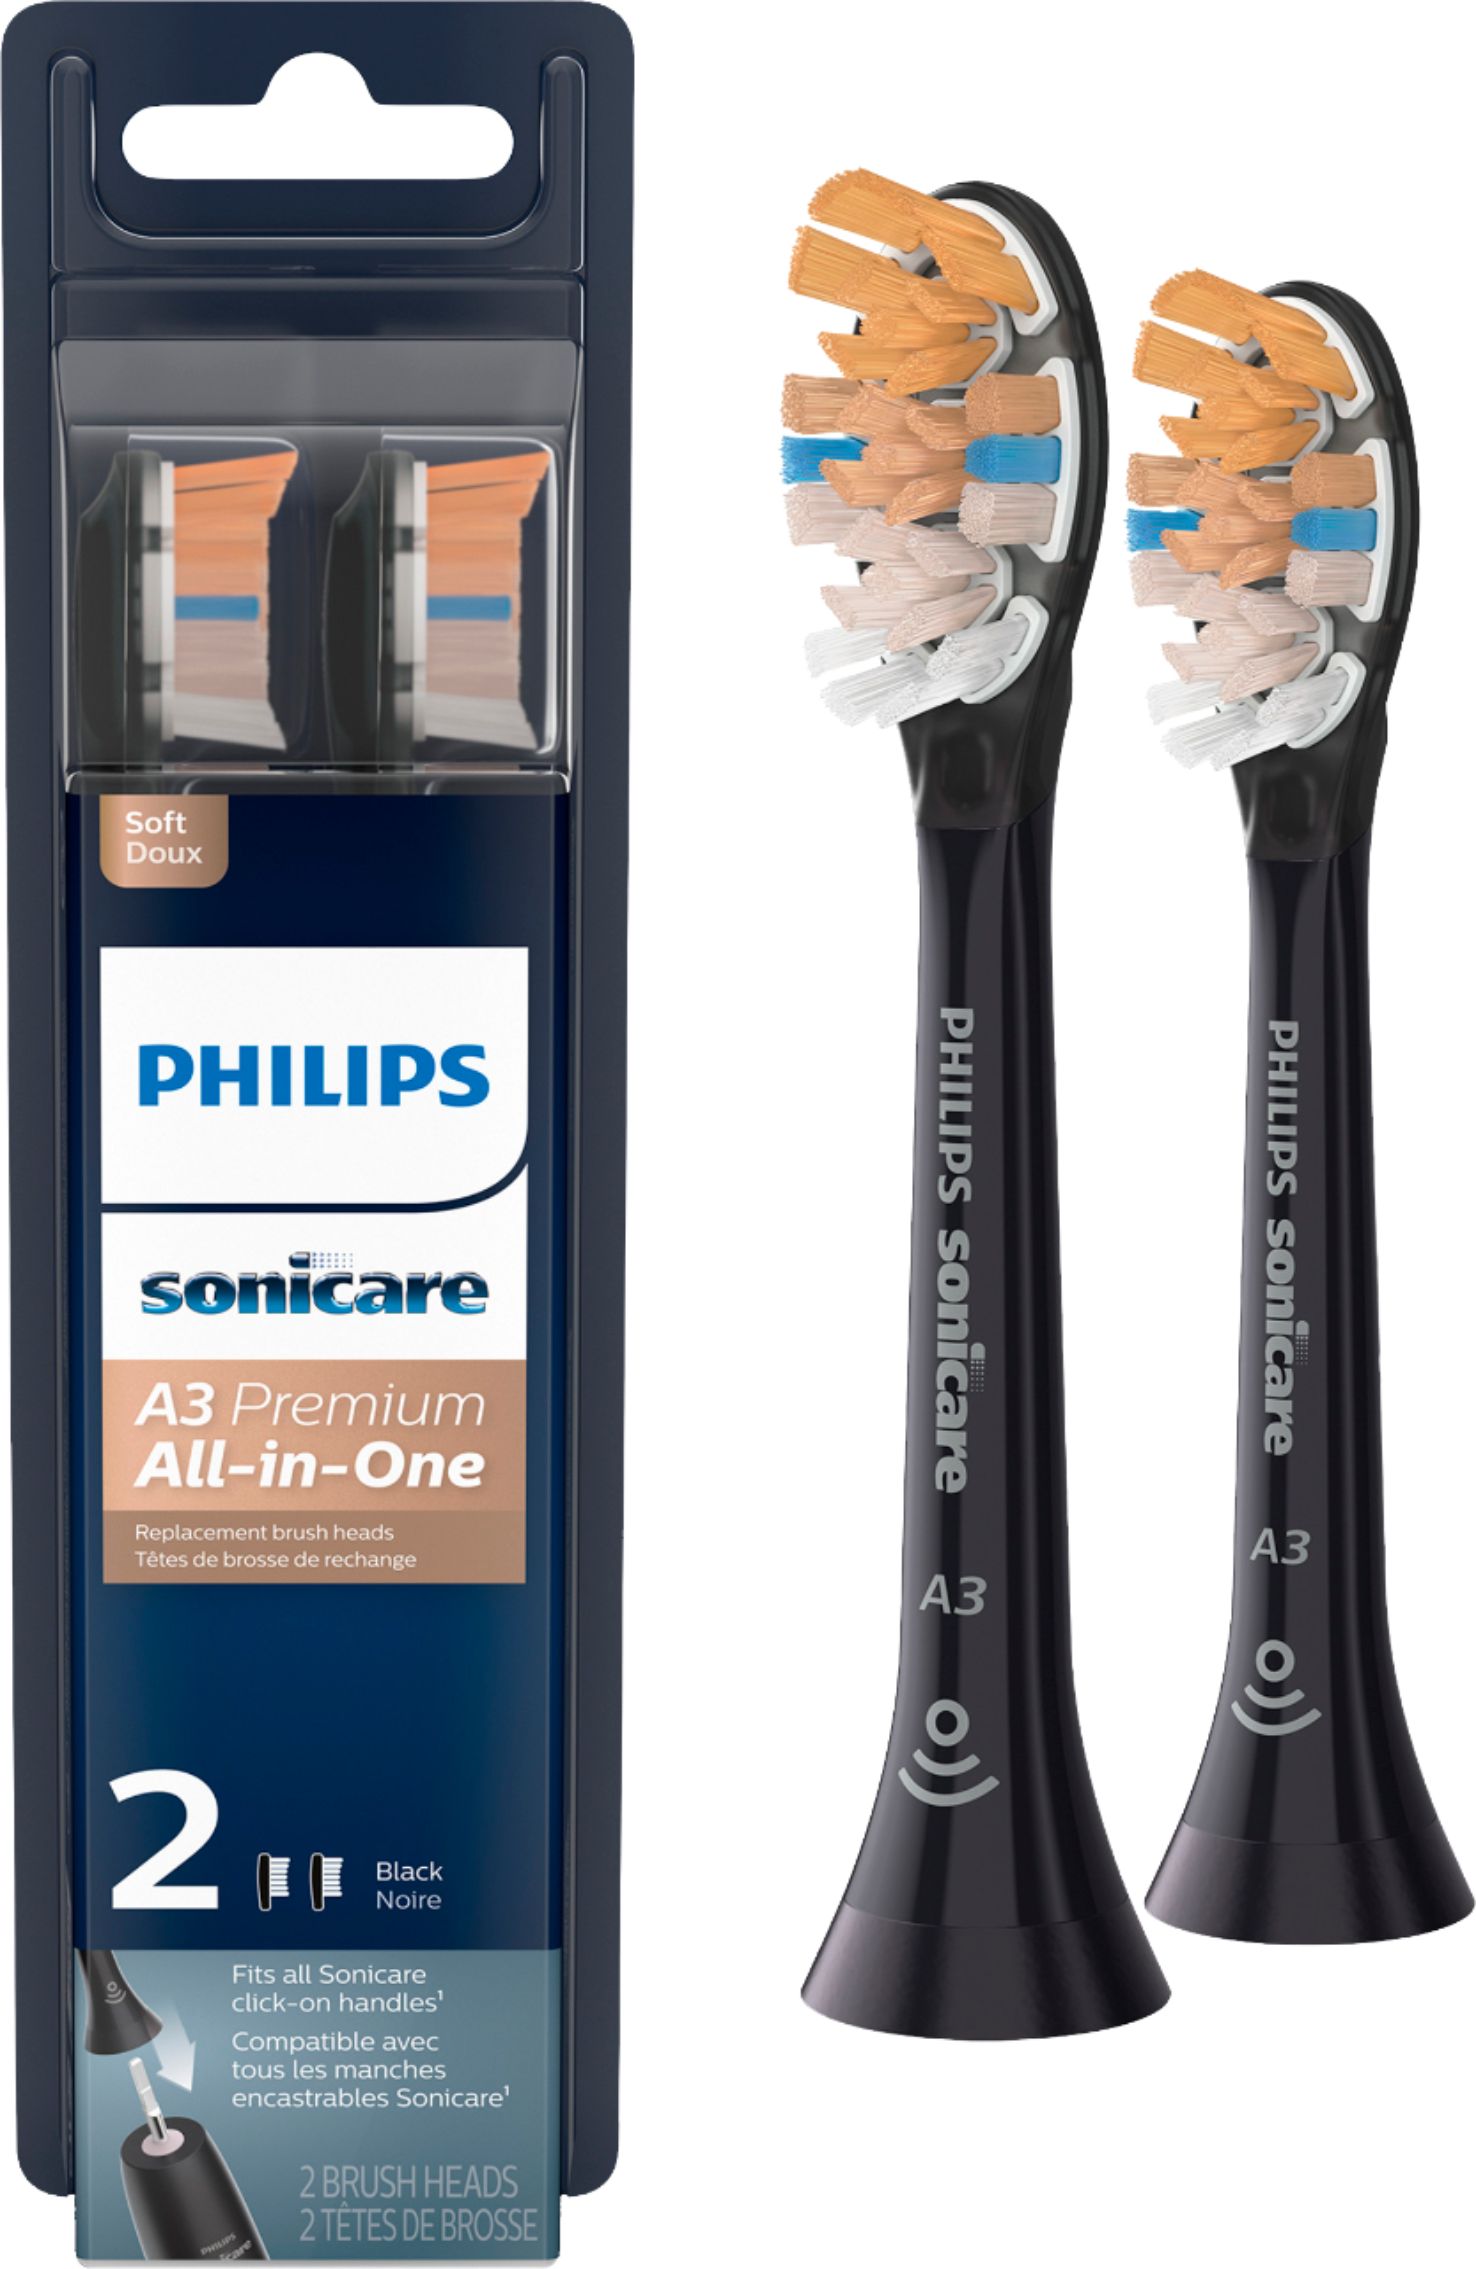 Angle View: Philips Sonicare - Premium All-in-One (A3) Replacement Toothbrush Heads, (2-pack) - Black